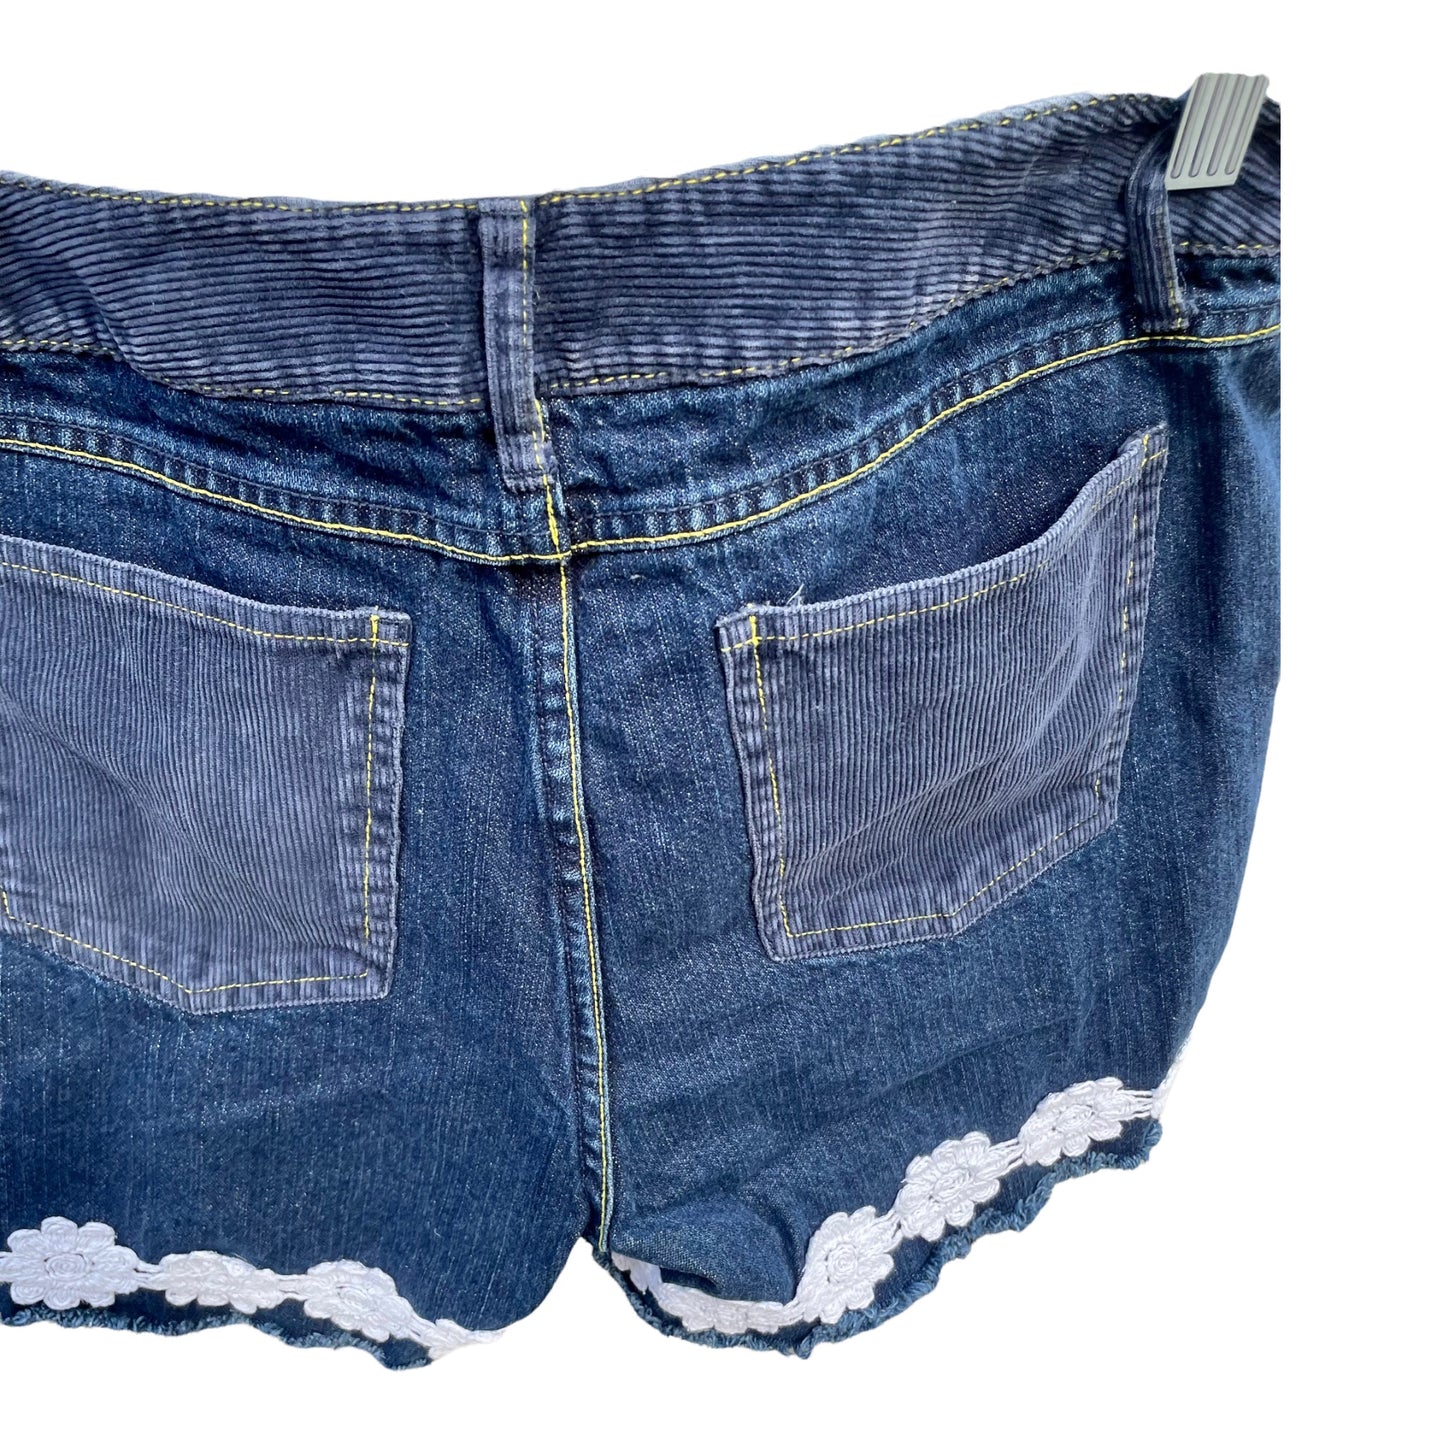 Upcycled Denim Shorts with White Floral Trim